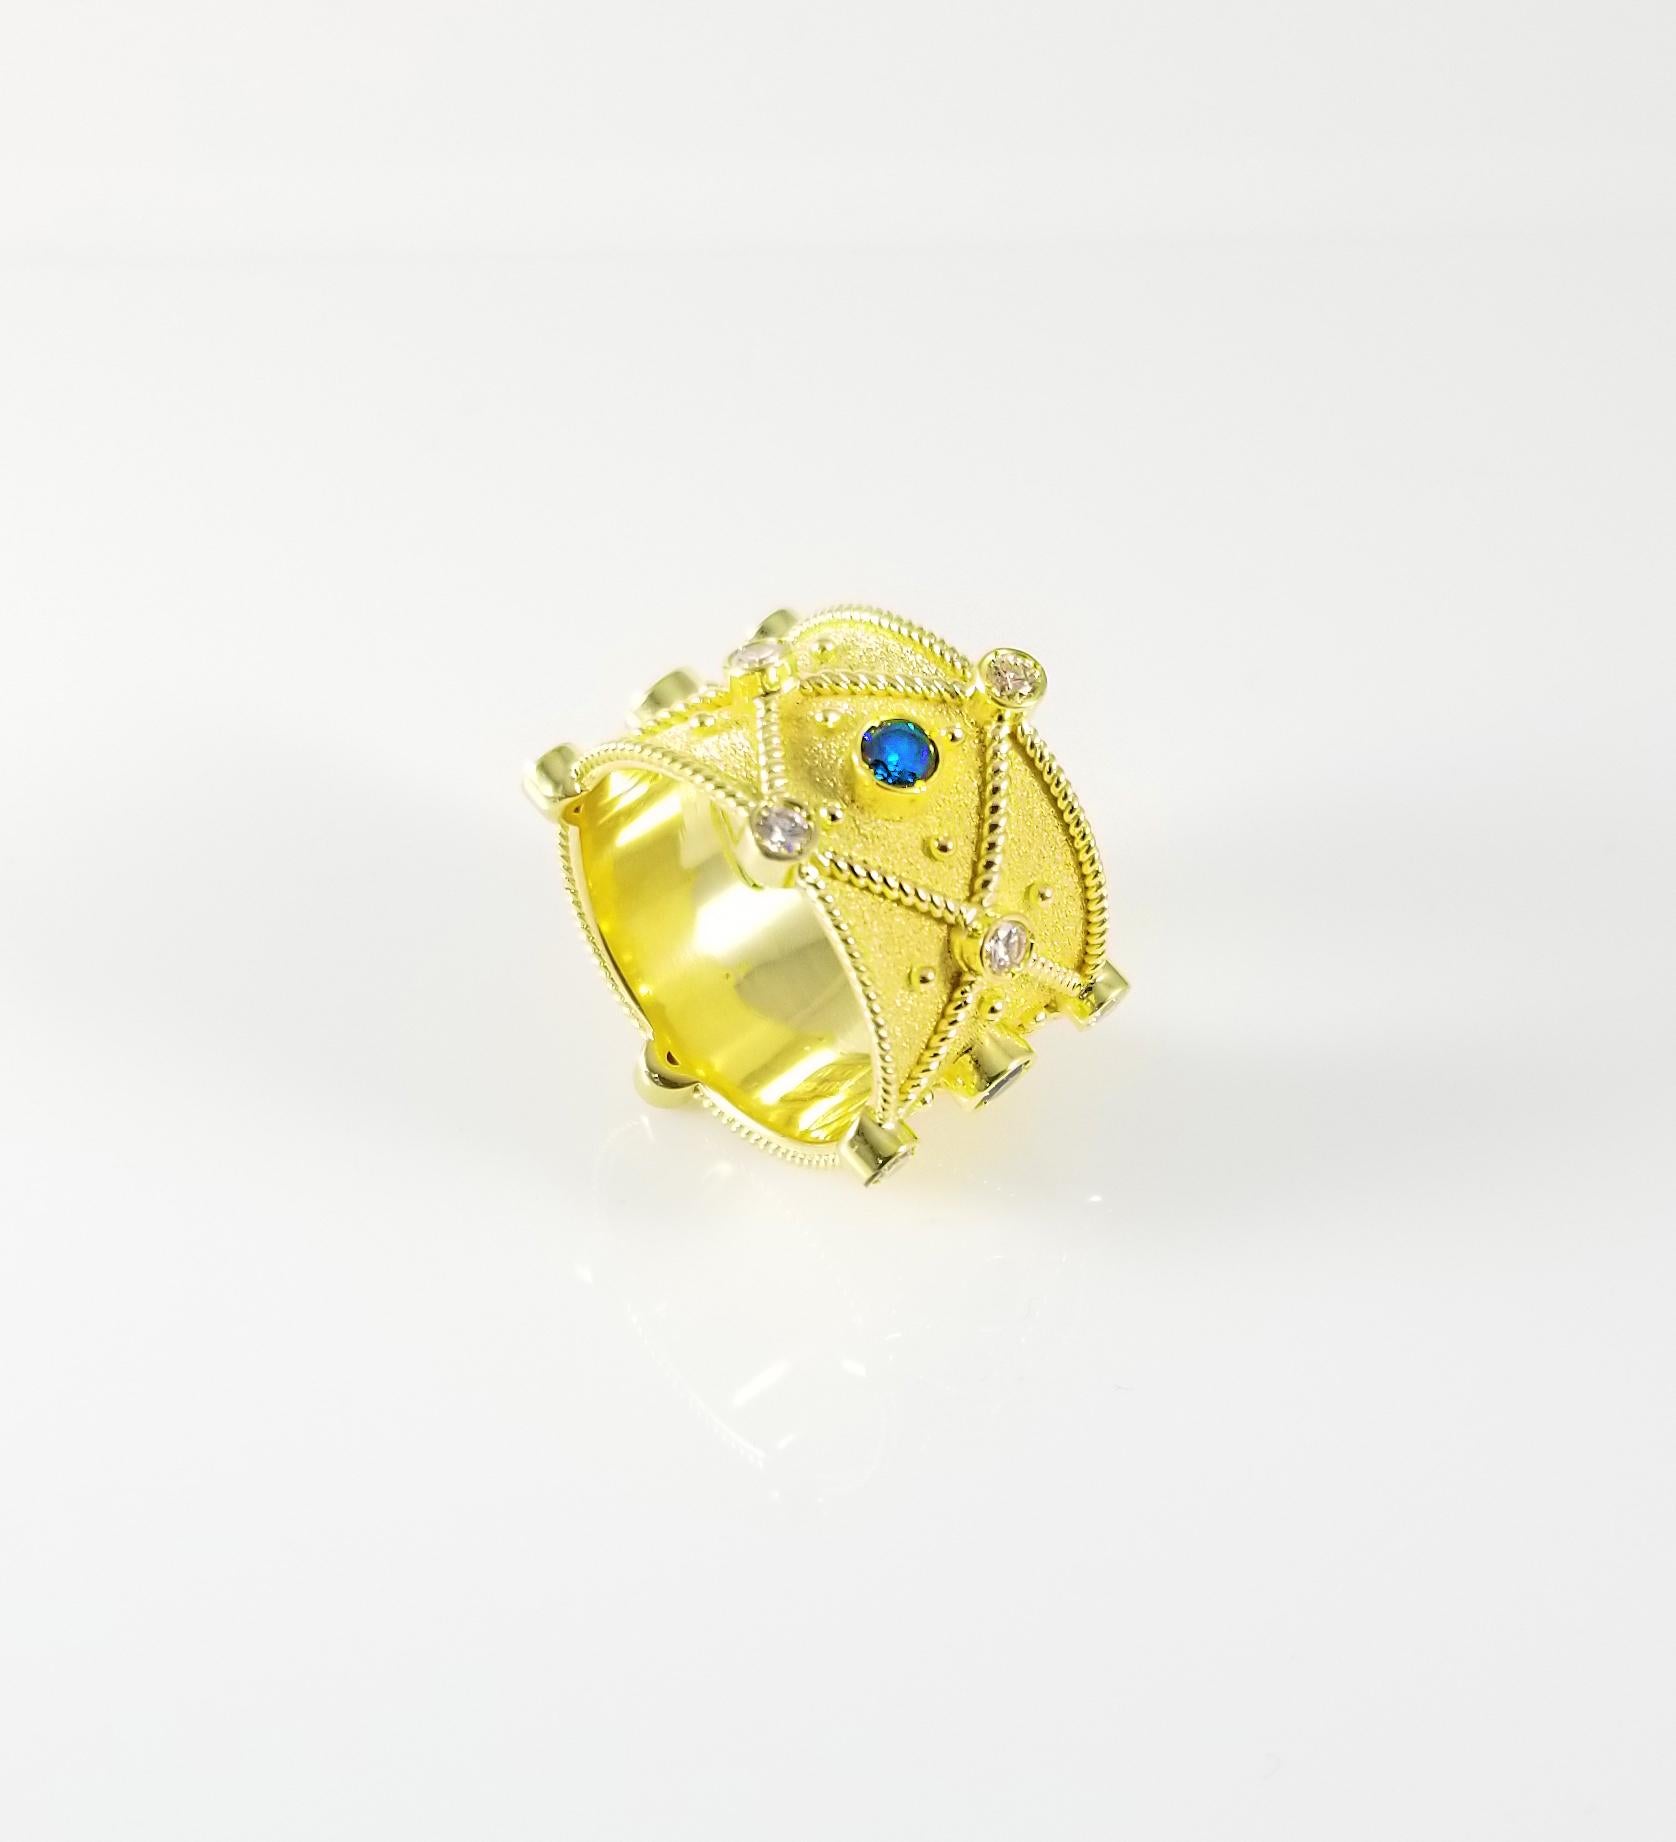 S.Georgios designer ring handmade from solid 18 Karat Yellow Gold and is microscopically decorated all the way around with gold beads and wires and has a unique velvet look on the background. This gorgeous piece features 4 Brilliant cut Blue